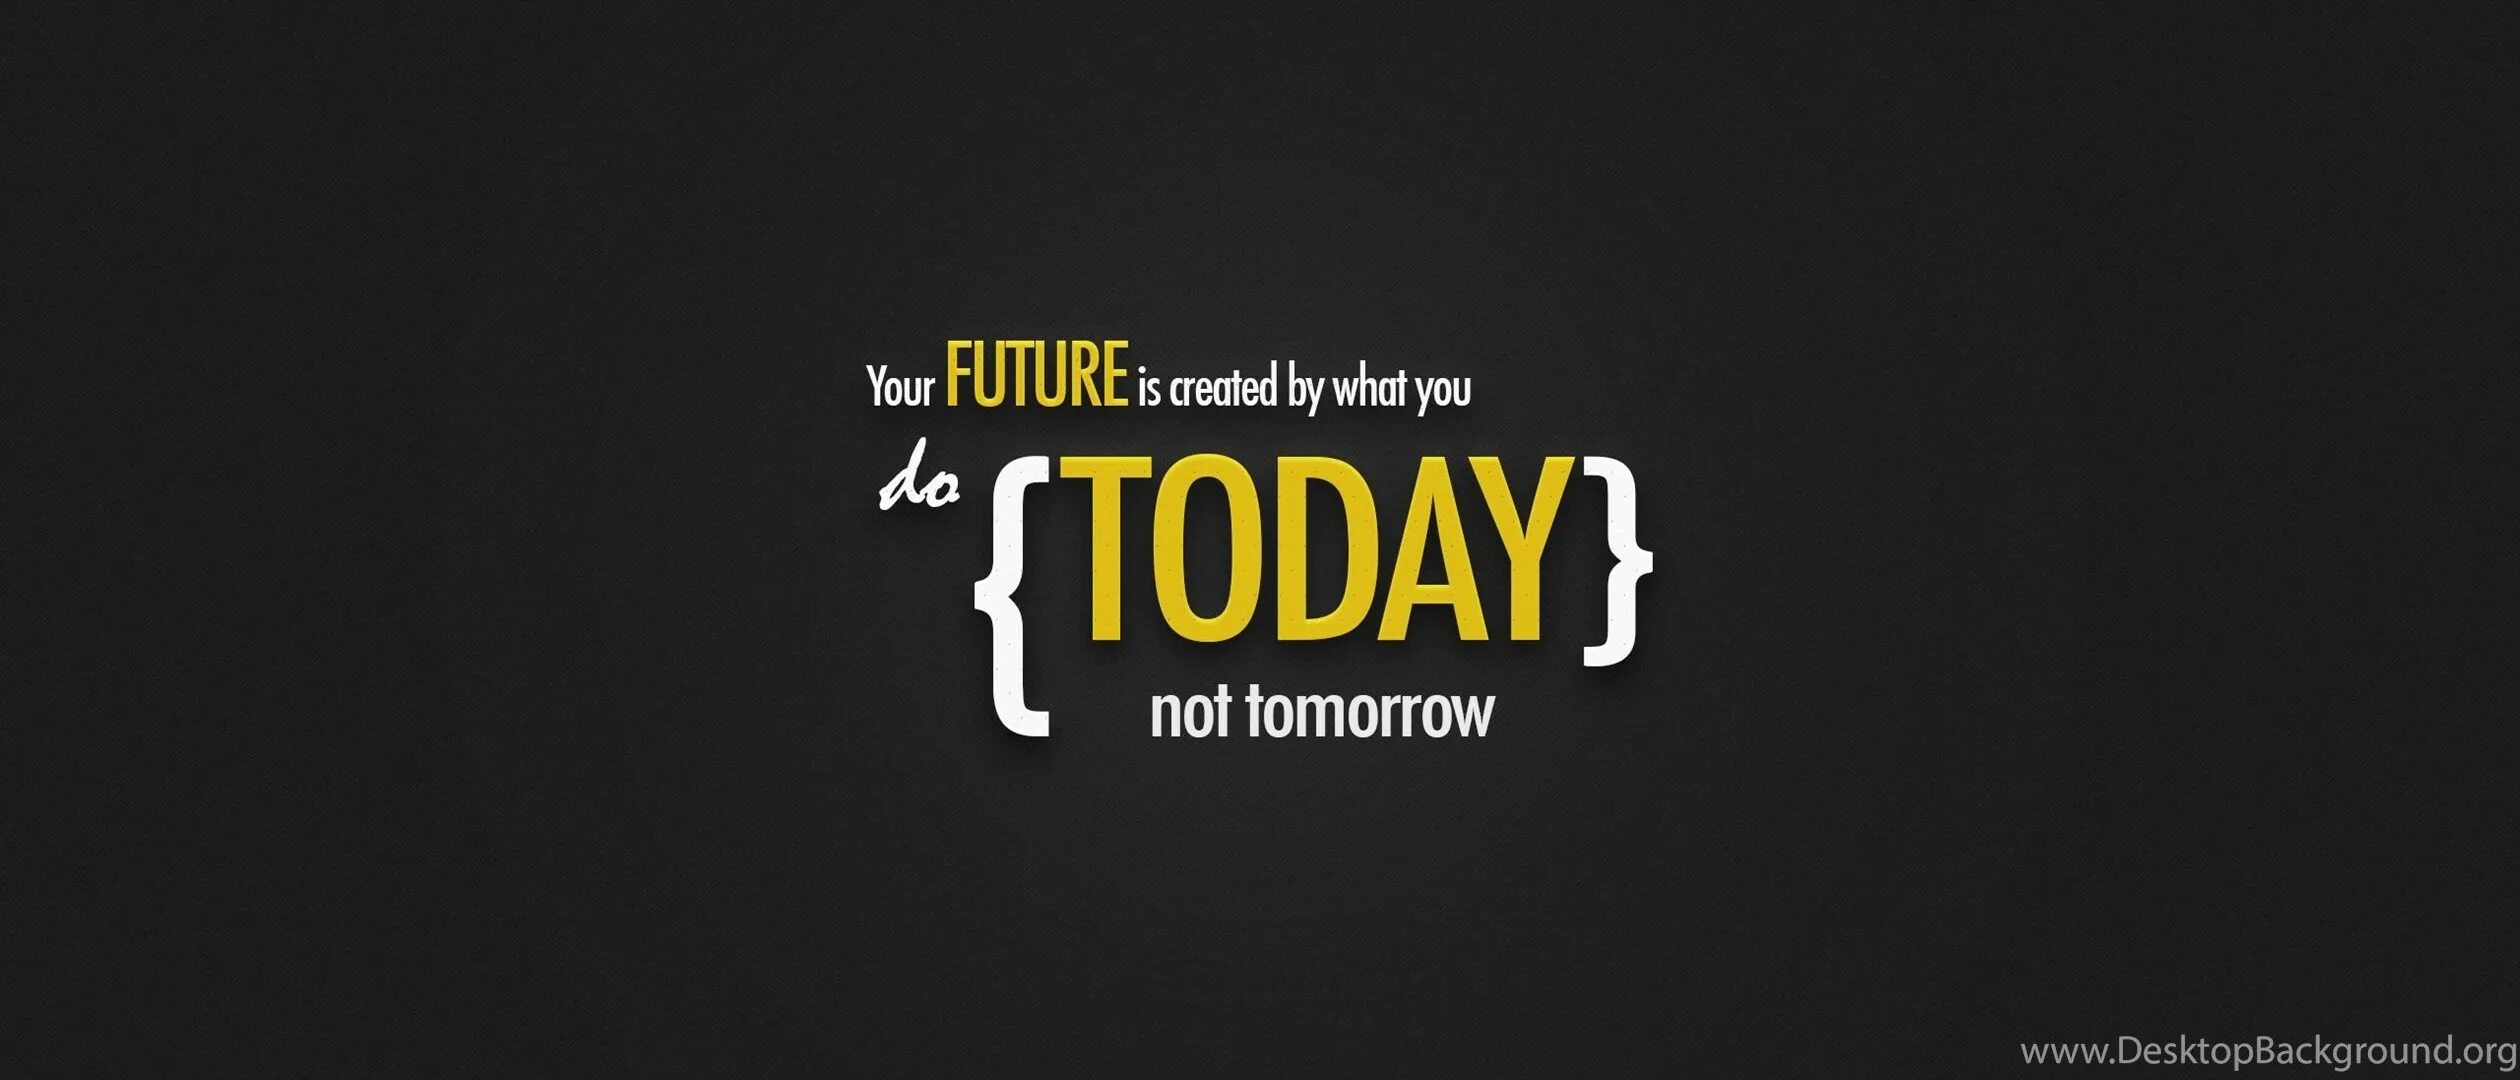 Today обои. Your Future is created by what you do today. Create your Future. Your Future is created by what you обои.